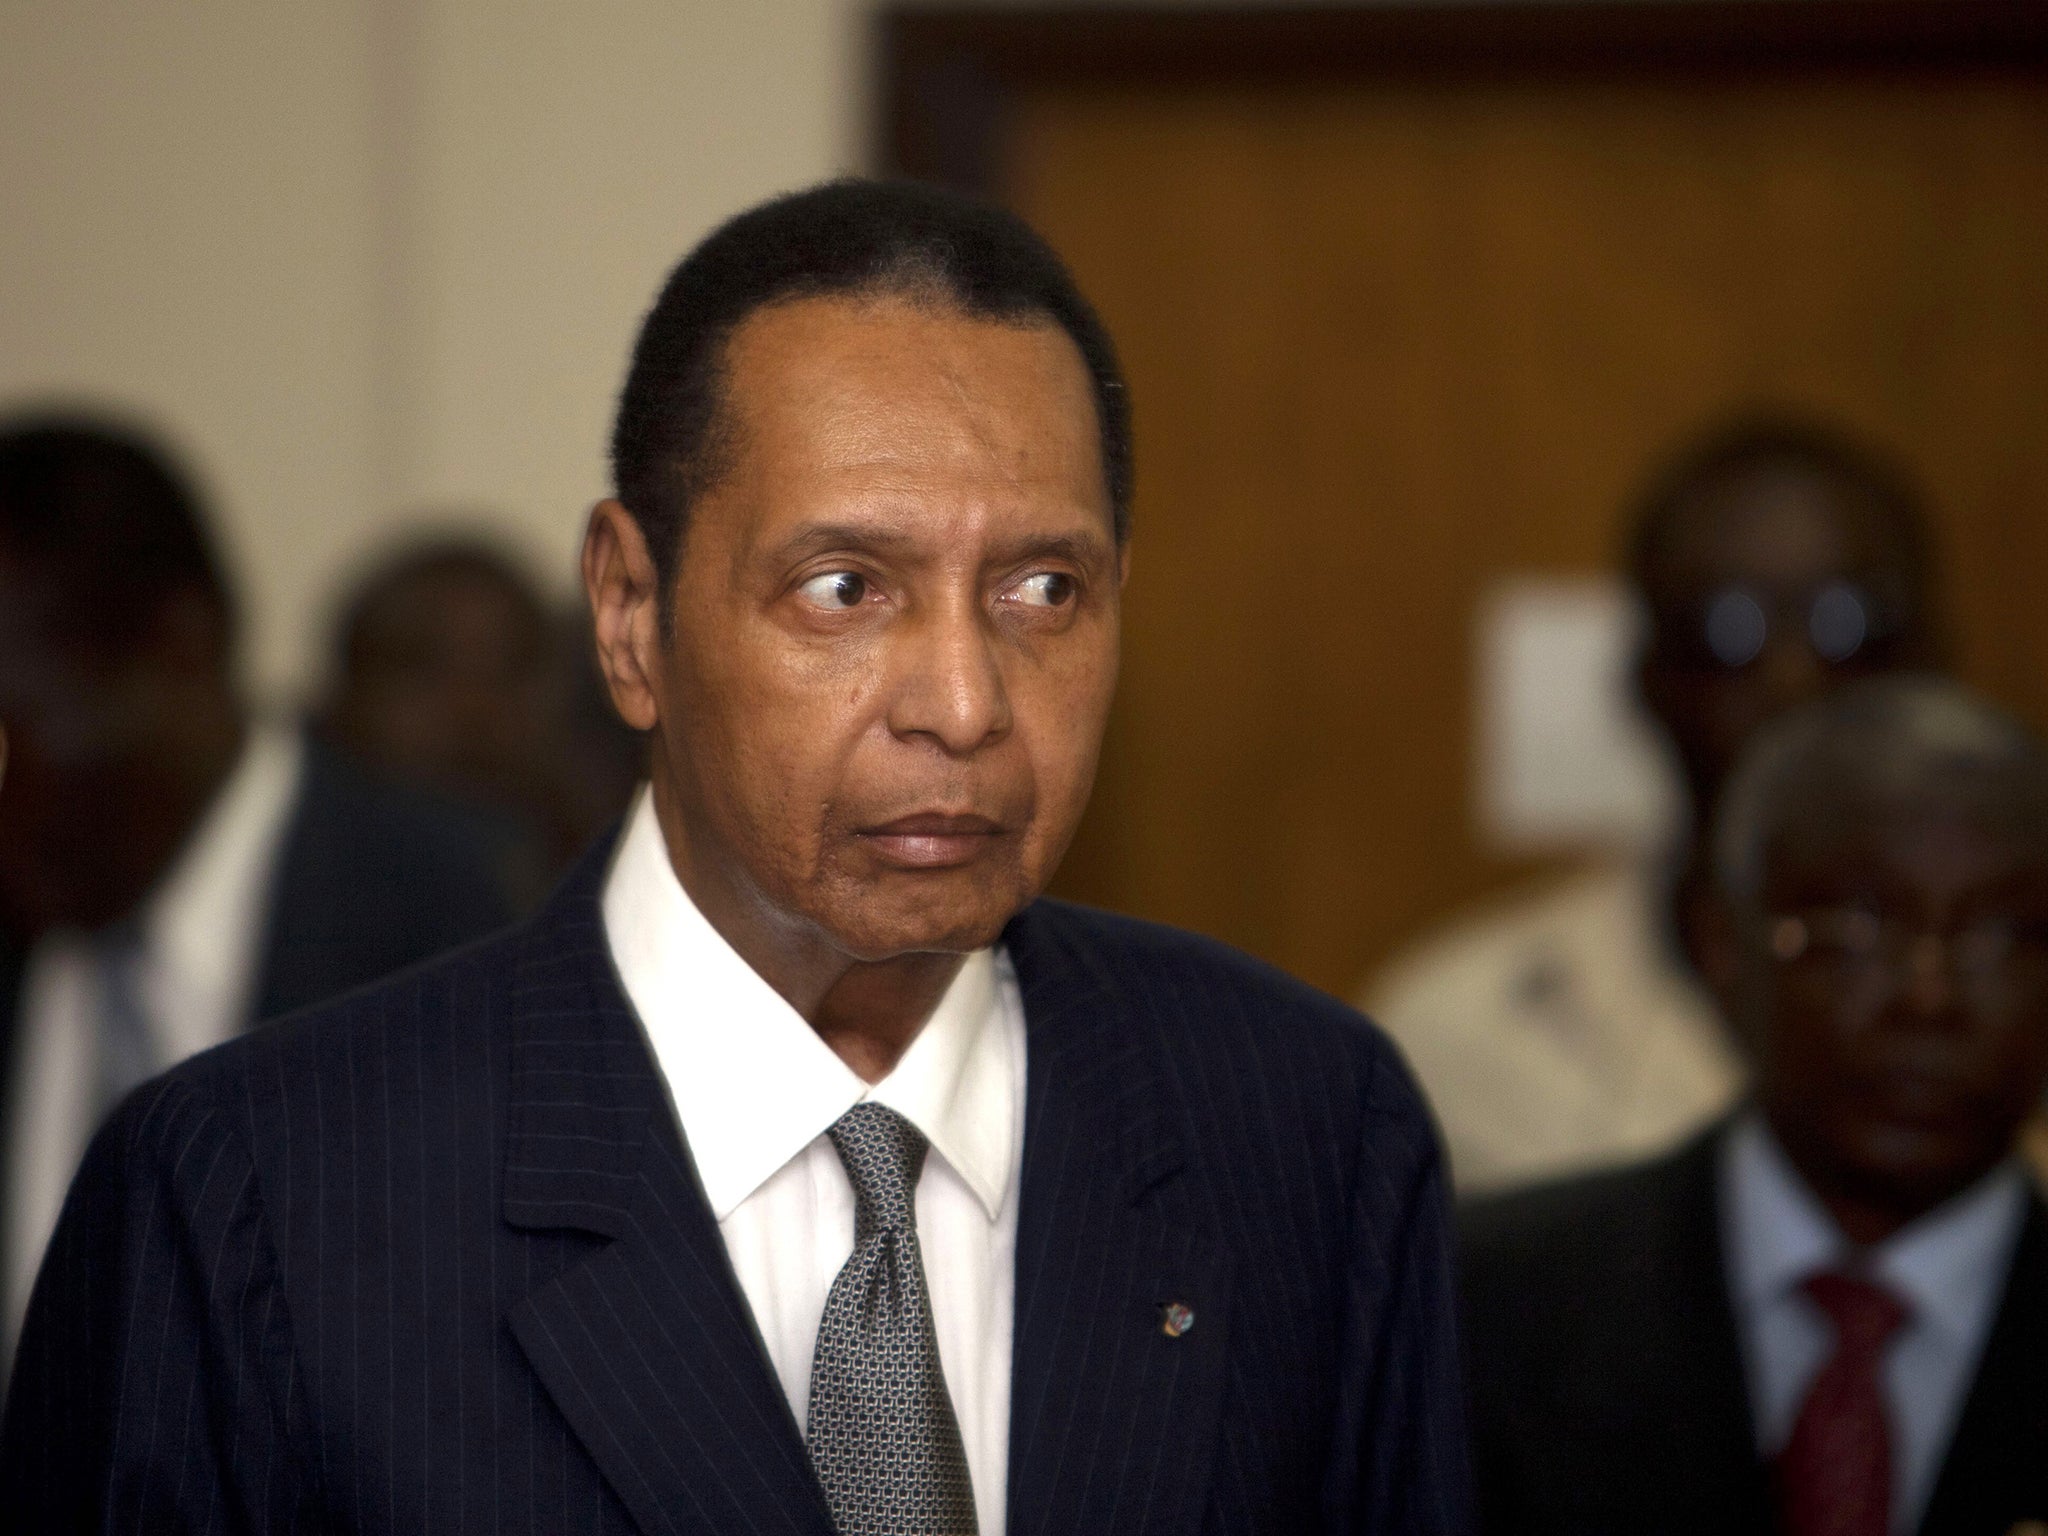 Duvalier attends a court hearing in 2013